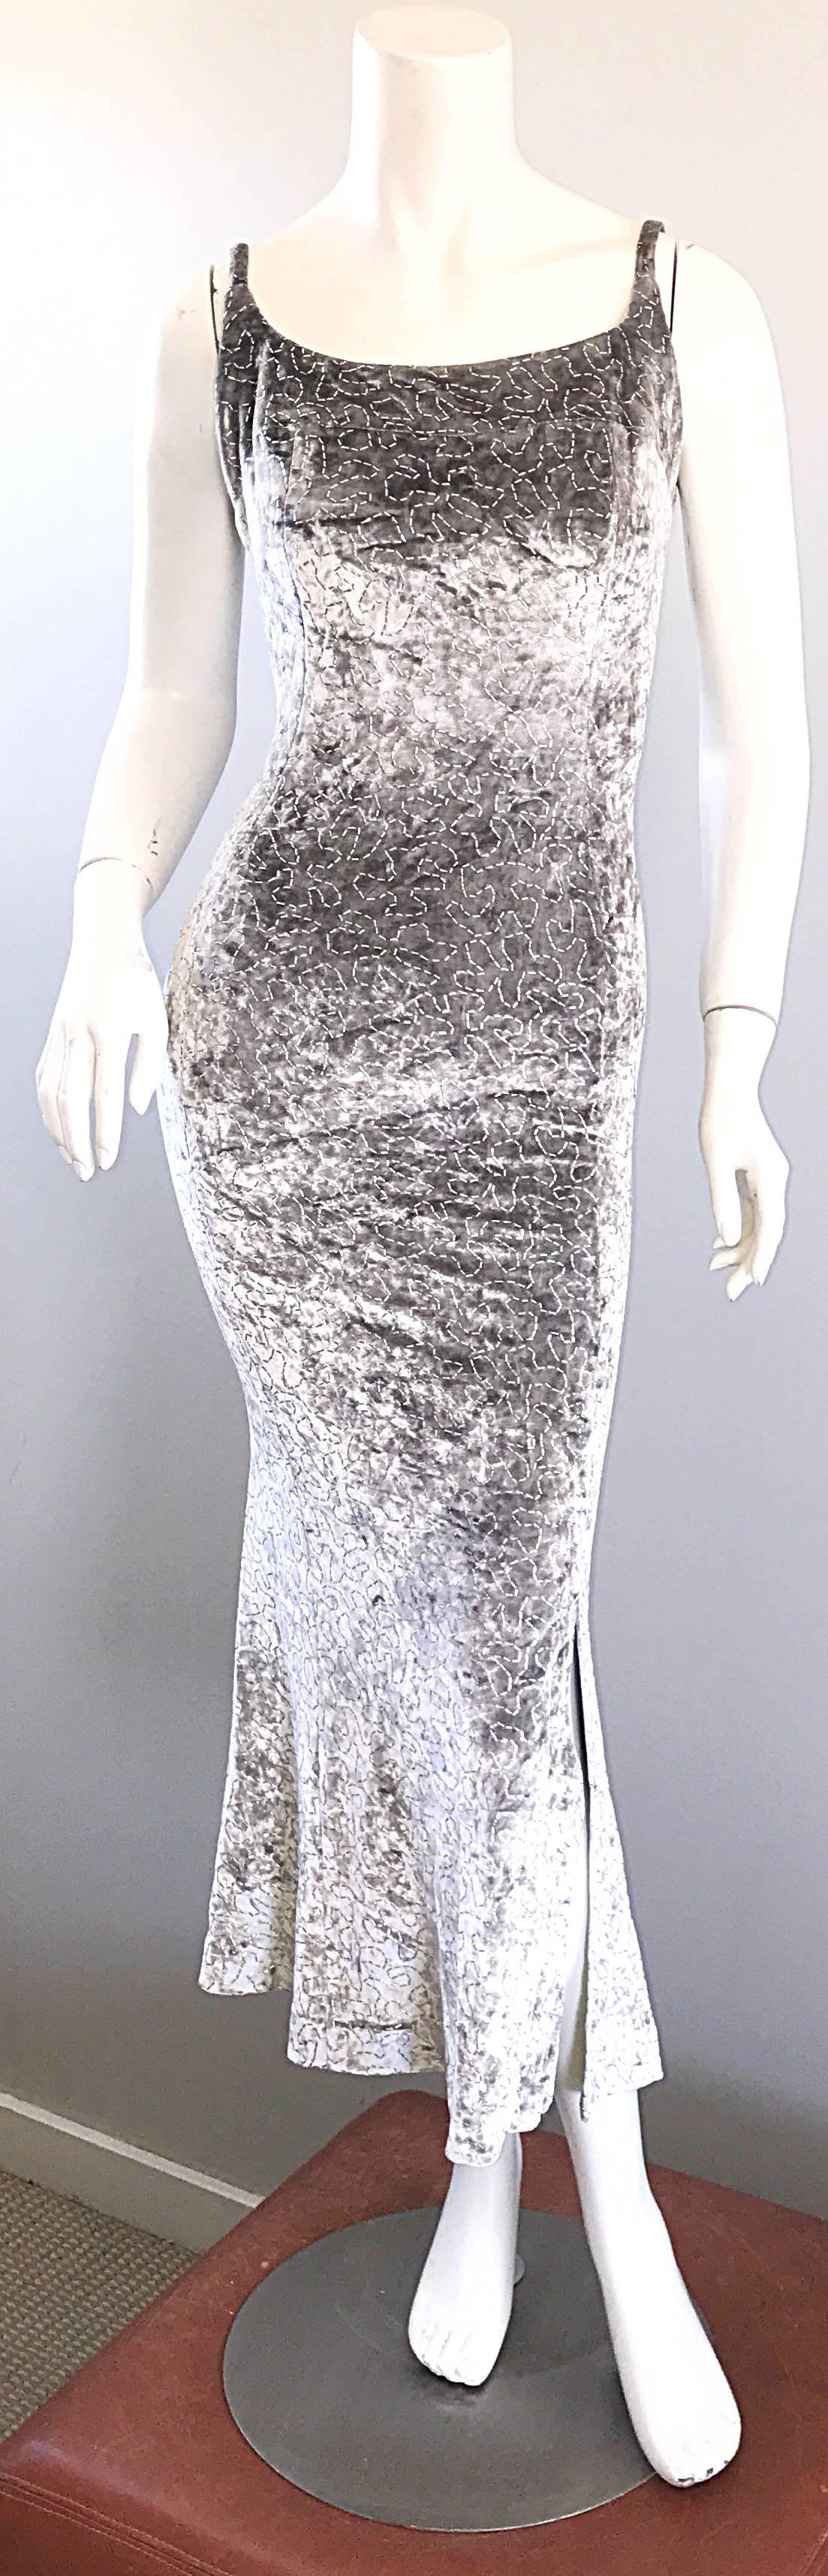 Sexy 90s JANINE OF LONDON for LILLIE RUBIN silver gray crushed velvet metallic bodycon dress! Features the softest crushed velvet that stretches to fit. Has what first appears to be silver sequins or beads is actually metallic in the fabric. Hidden